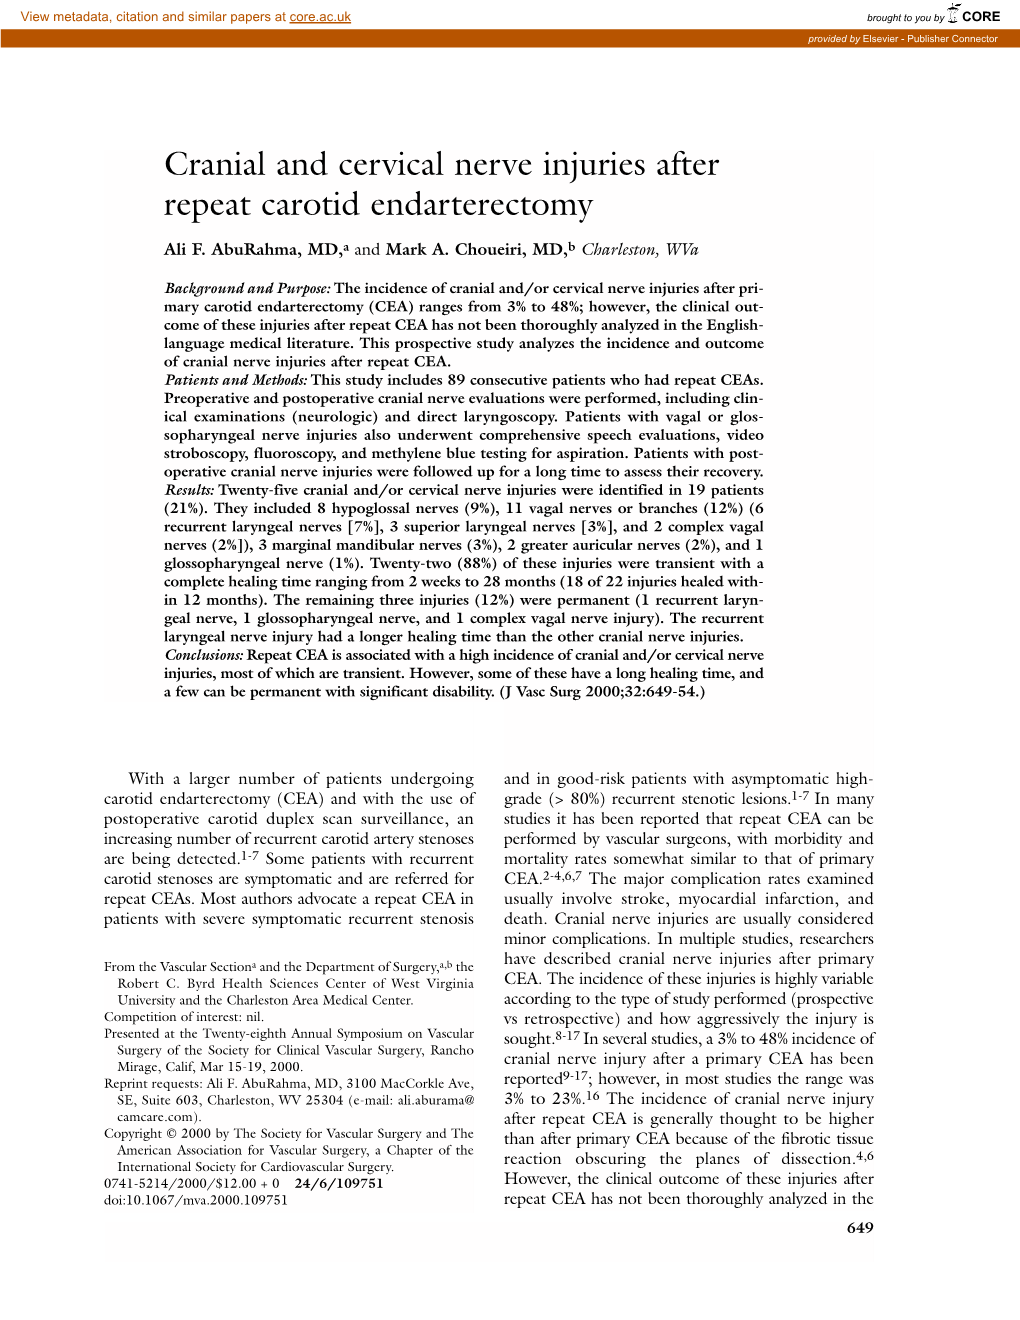 Cranial and Cervical Nerve Injuries After Repeat Carotid Endarterectomy